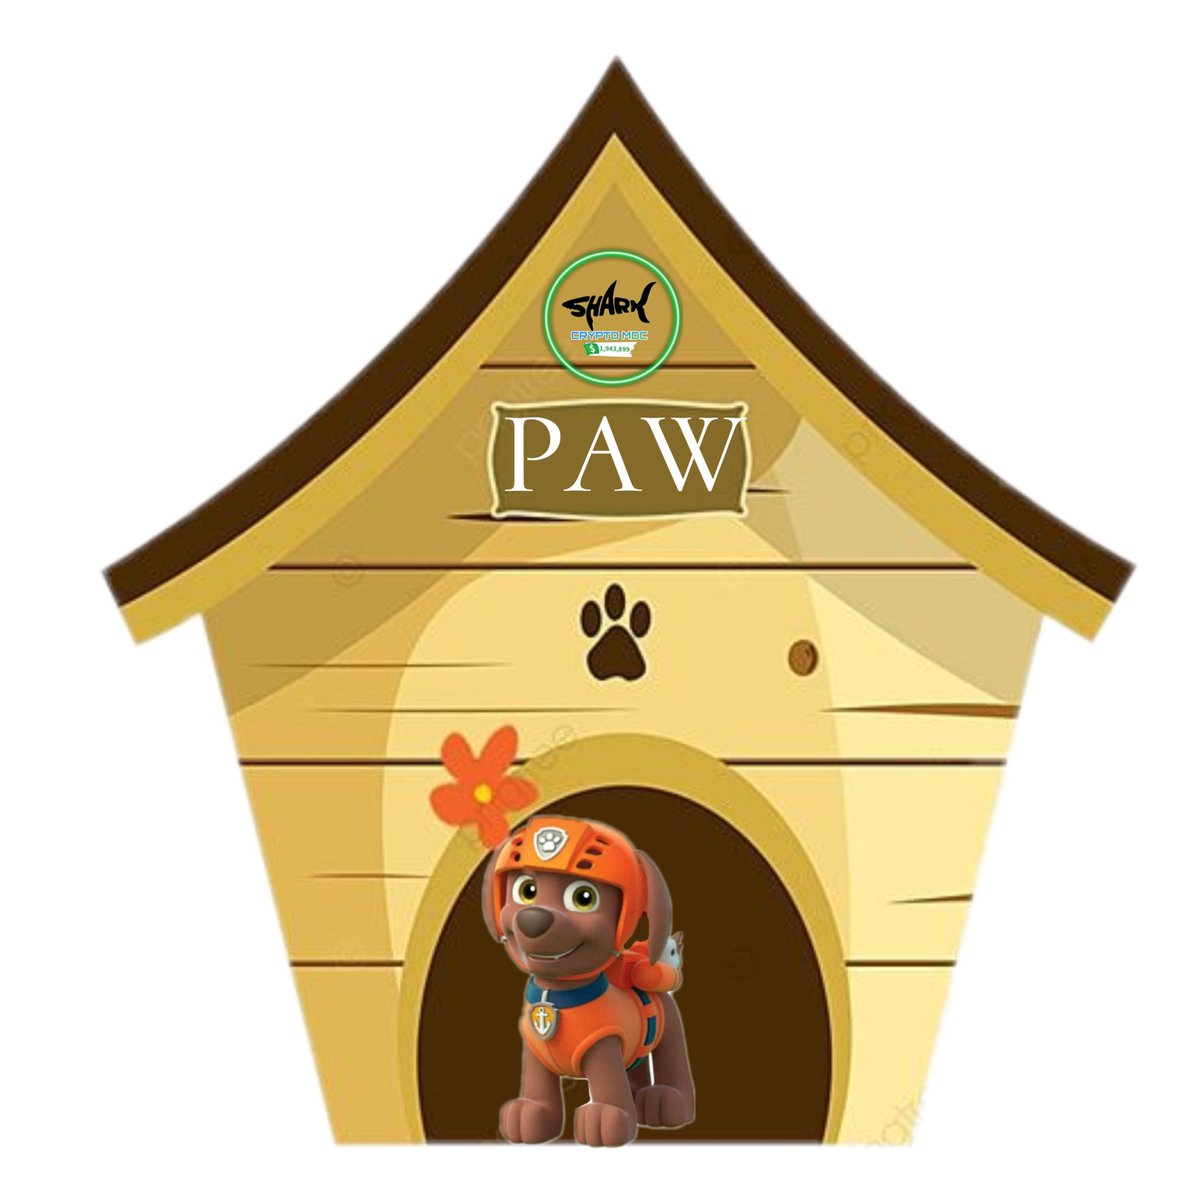 If you're seeing this, you are early to @PawZeroFour Join me and others! $PAW 🐶